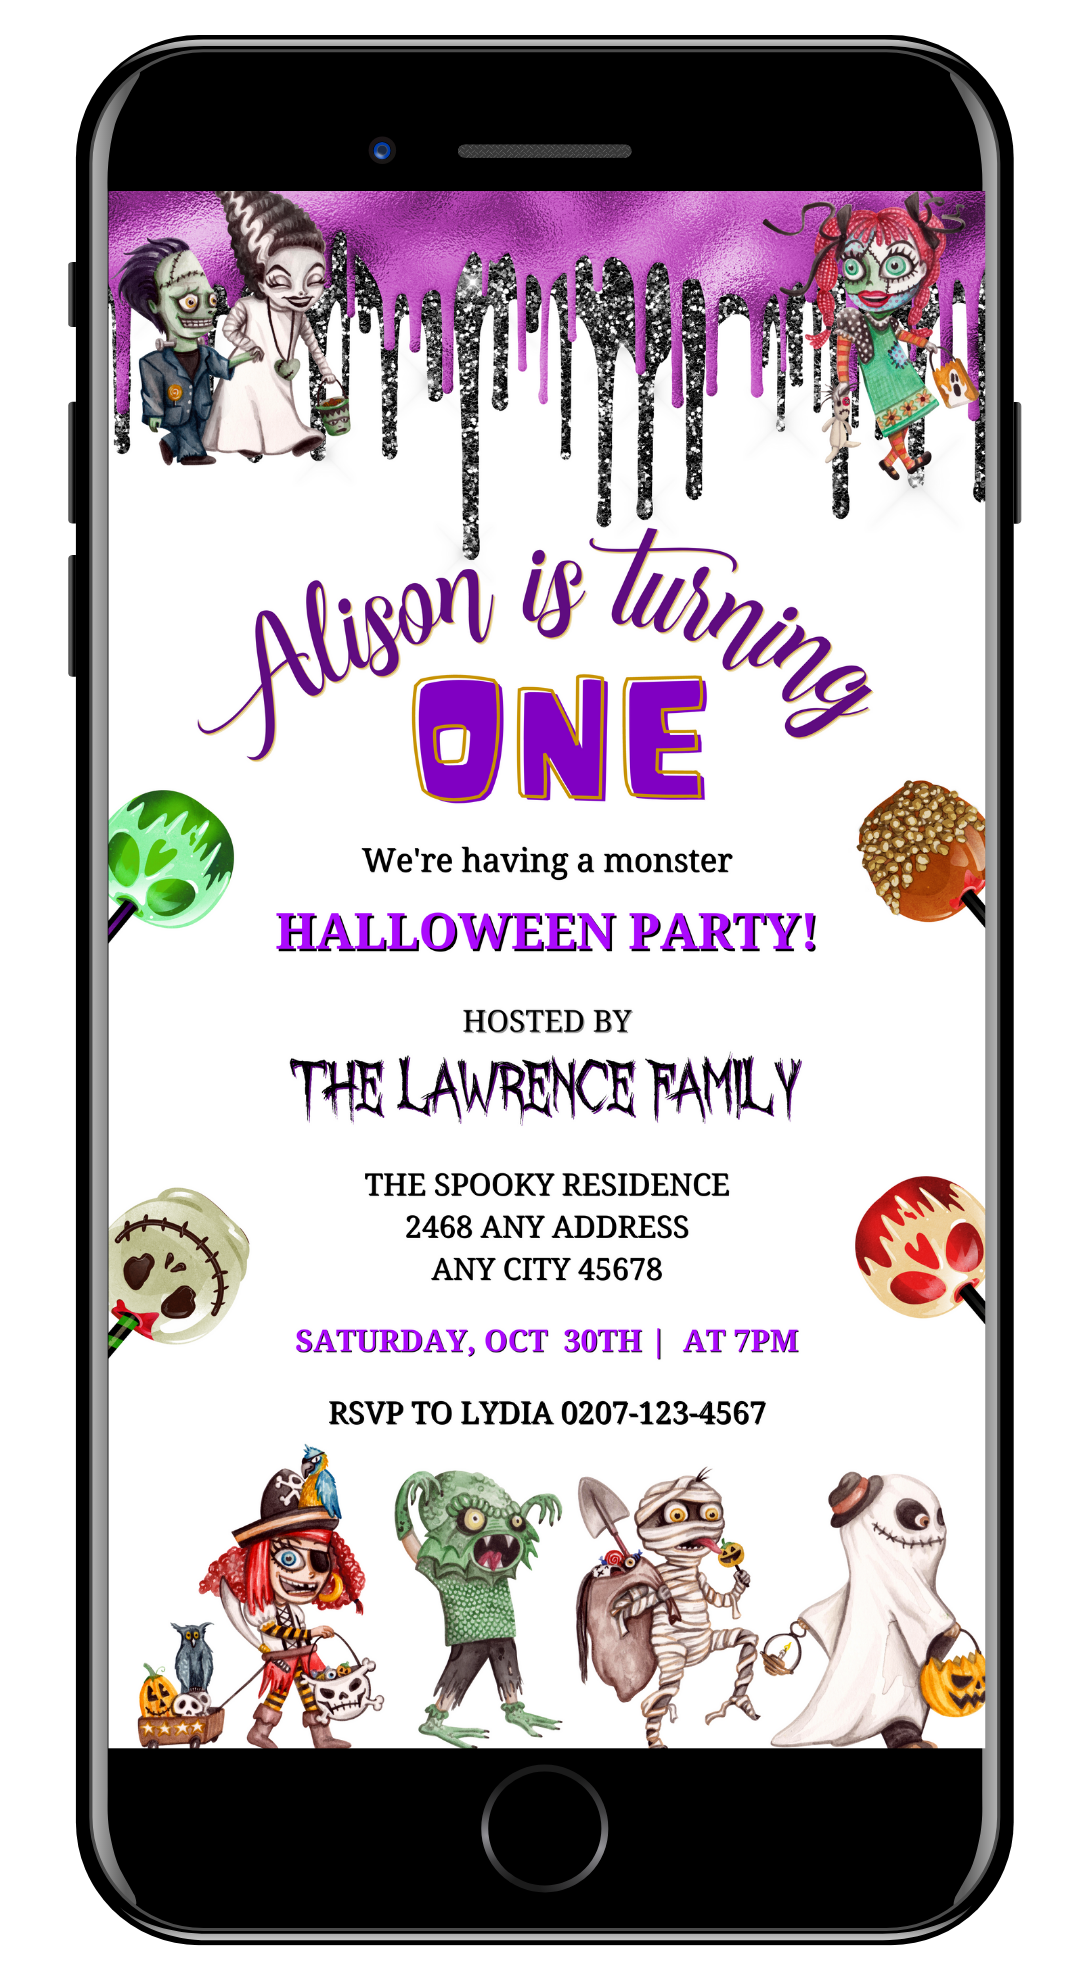 Gang of Monsters White Purple | Children's Halloween Party Evite shows cartoon monsters on a customizable digital invitation template.